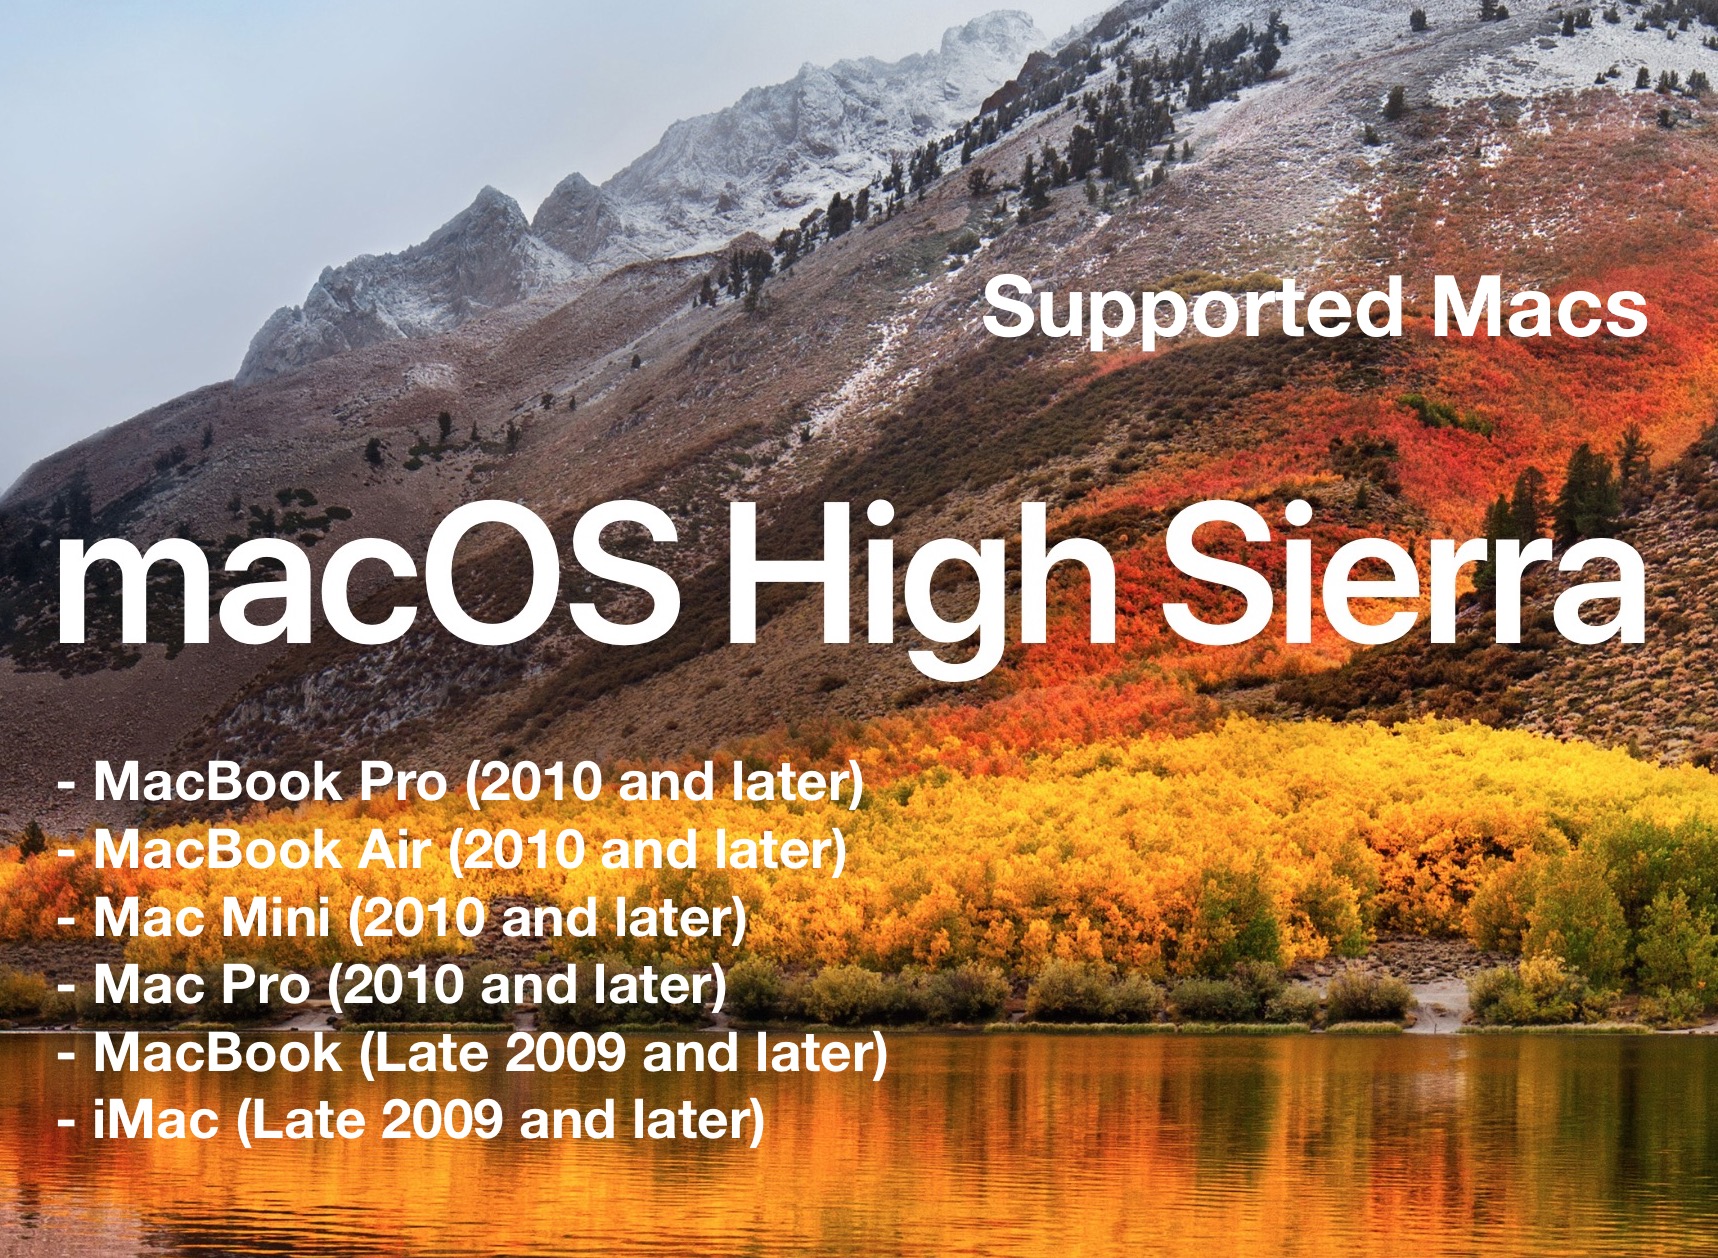 is my mac supported for high sierra